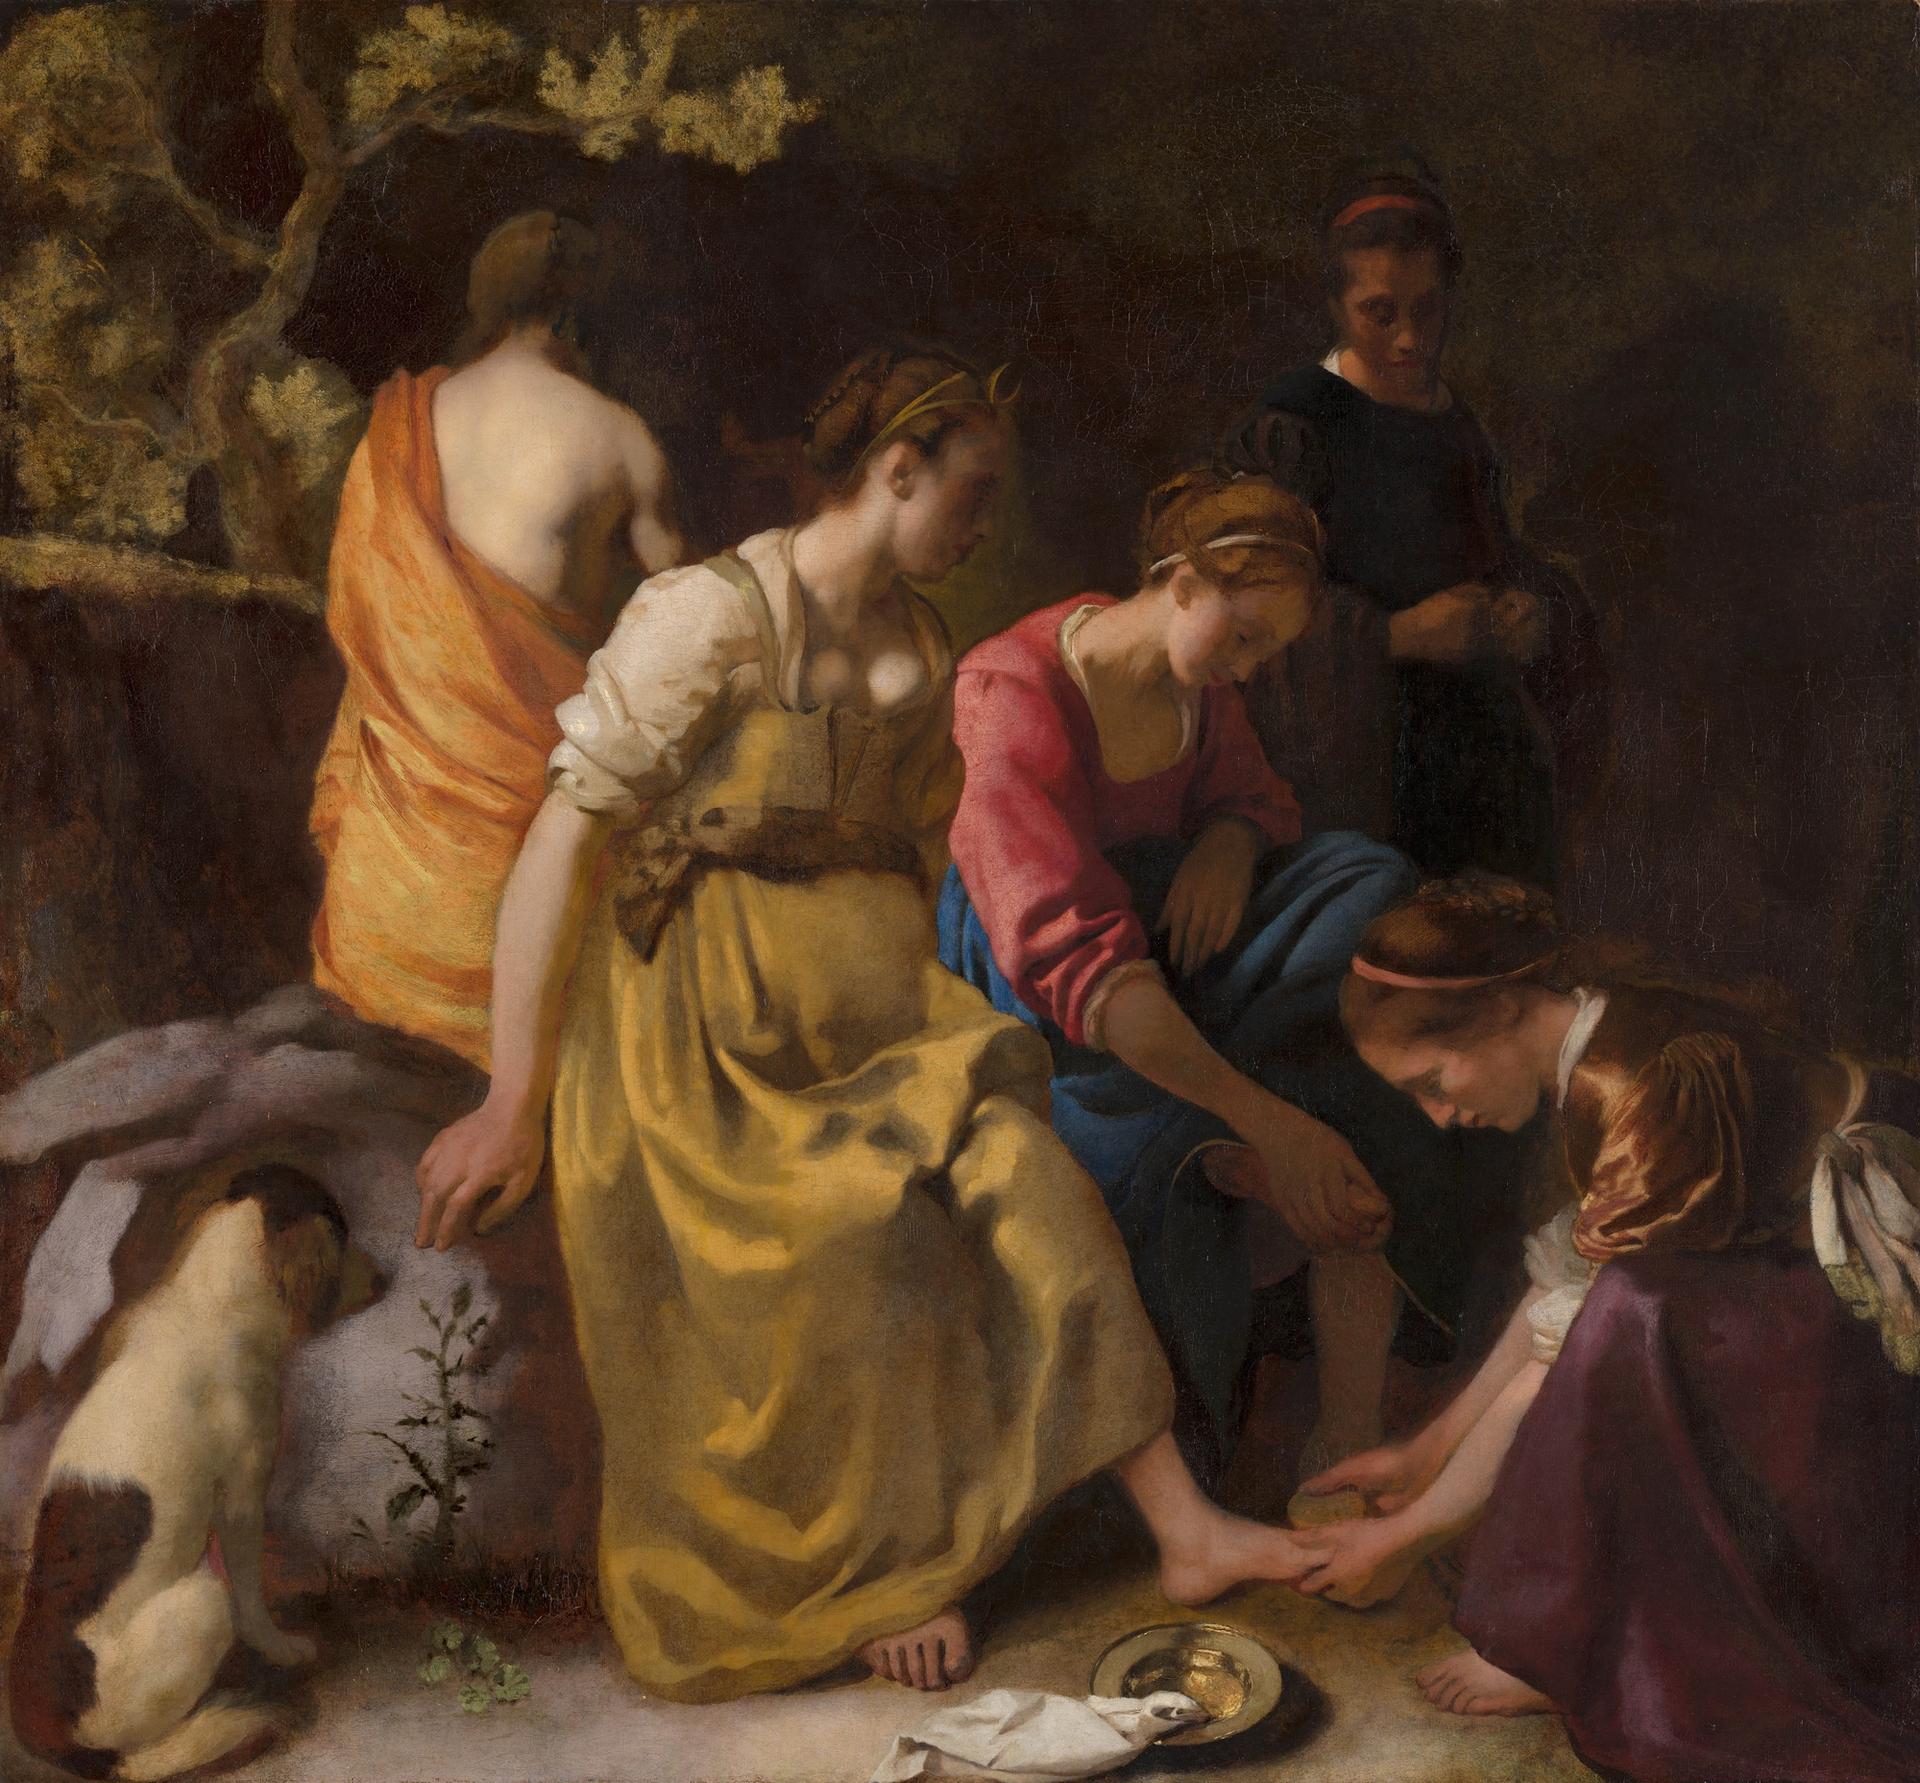 Johannes Vermeer's Diana and her Nymphs (1653-54), part of Mauritshuis collection, will now join the Rijksmuseum's exhibition Courtesy of the Mauritshuis, The Hague